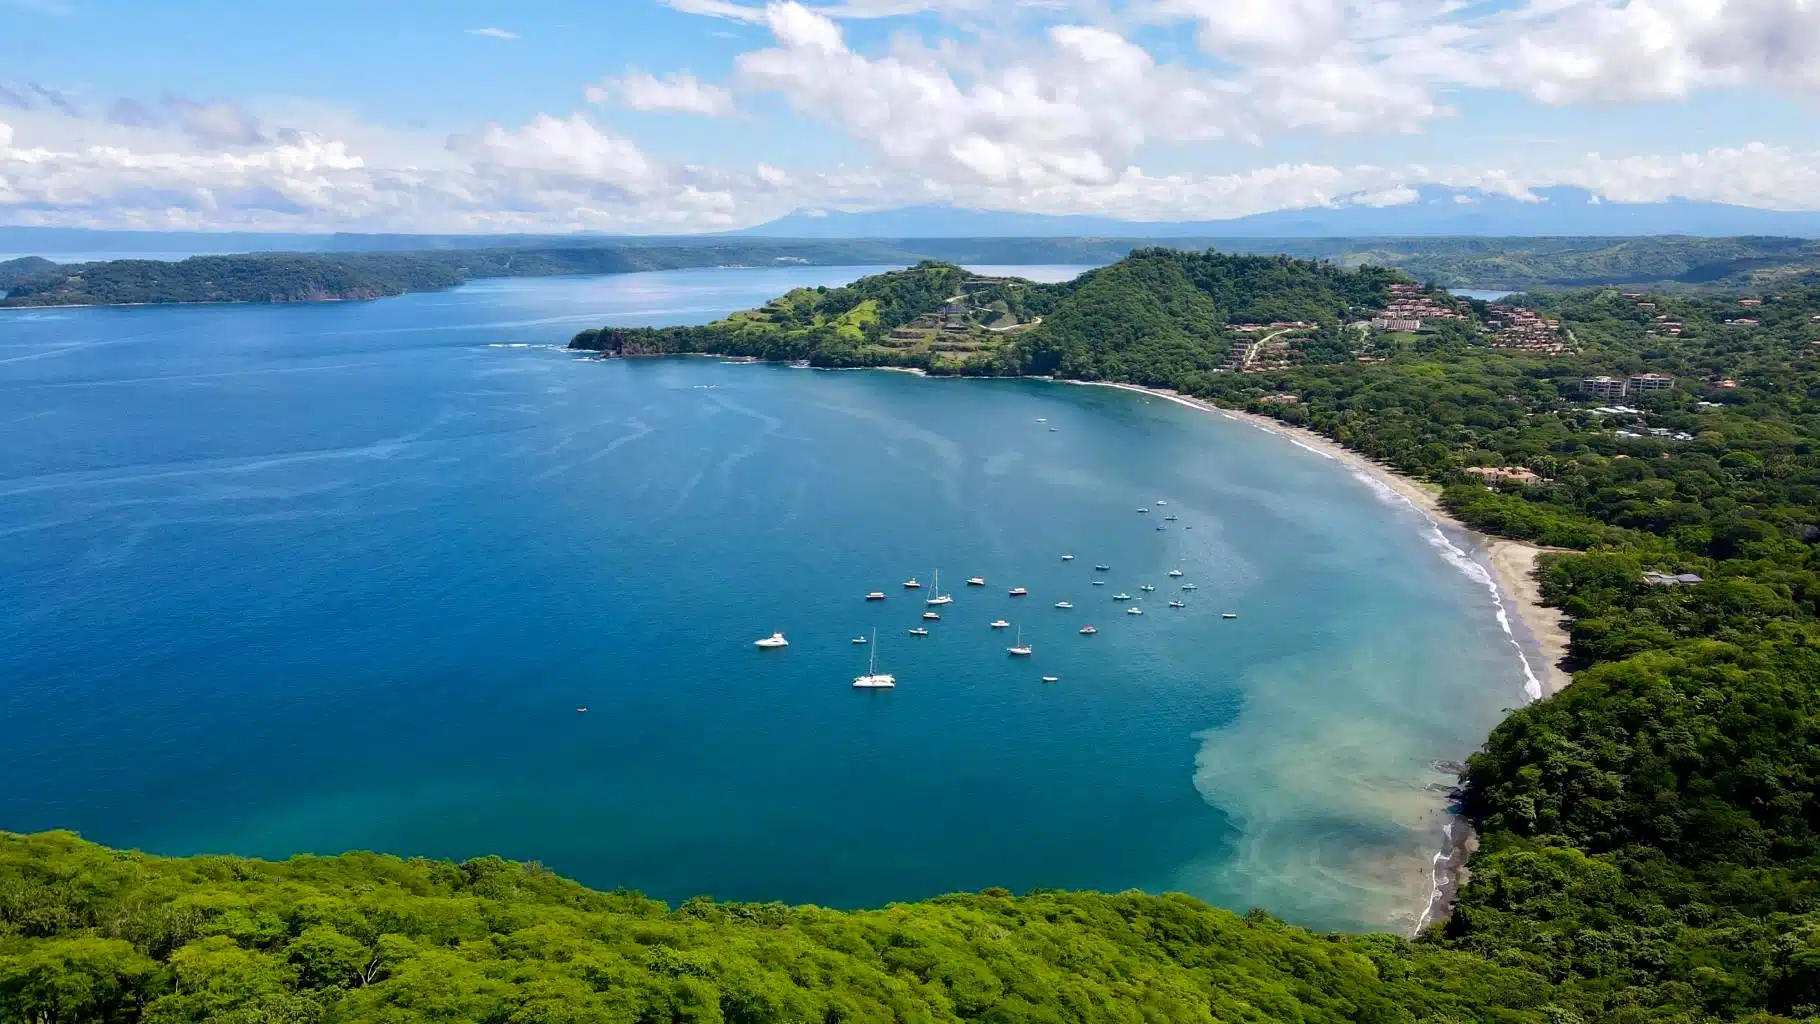 Costa Rica aerial ocean view, fundraiser auction items, live auction items